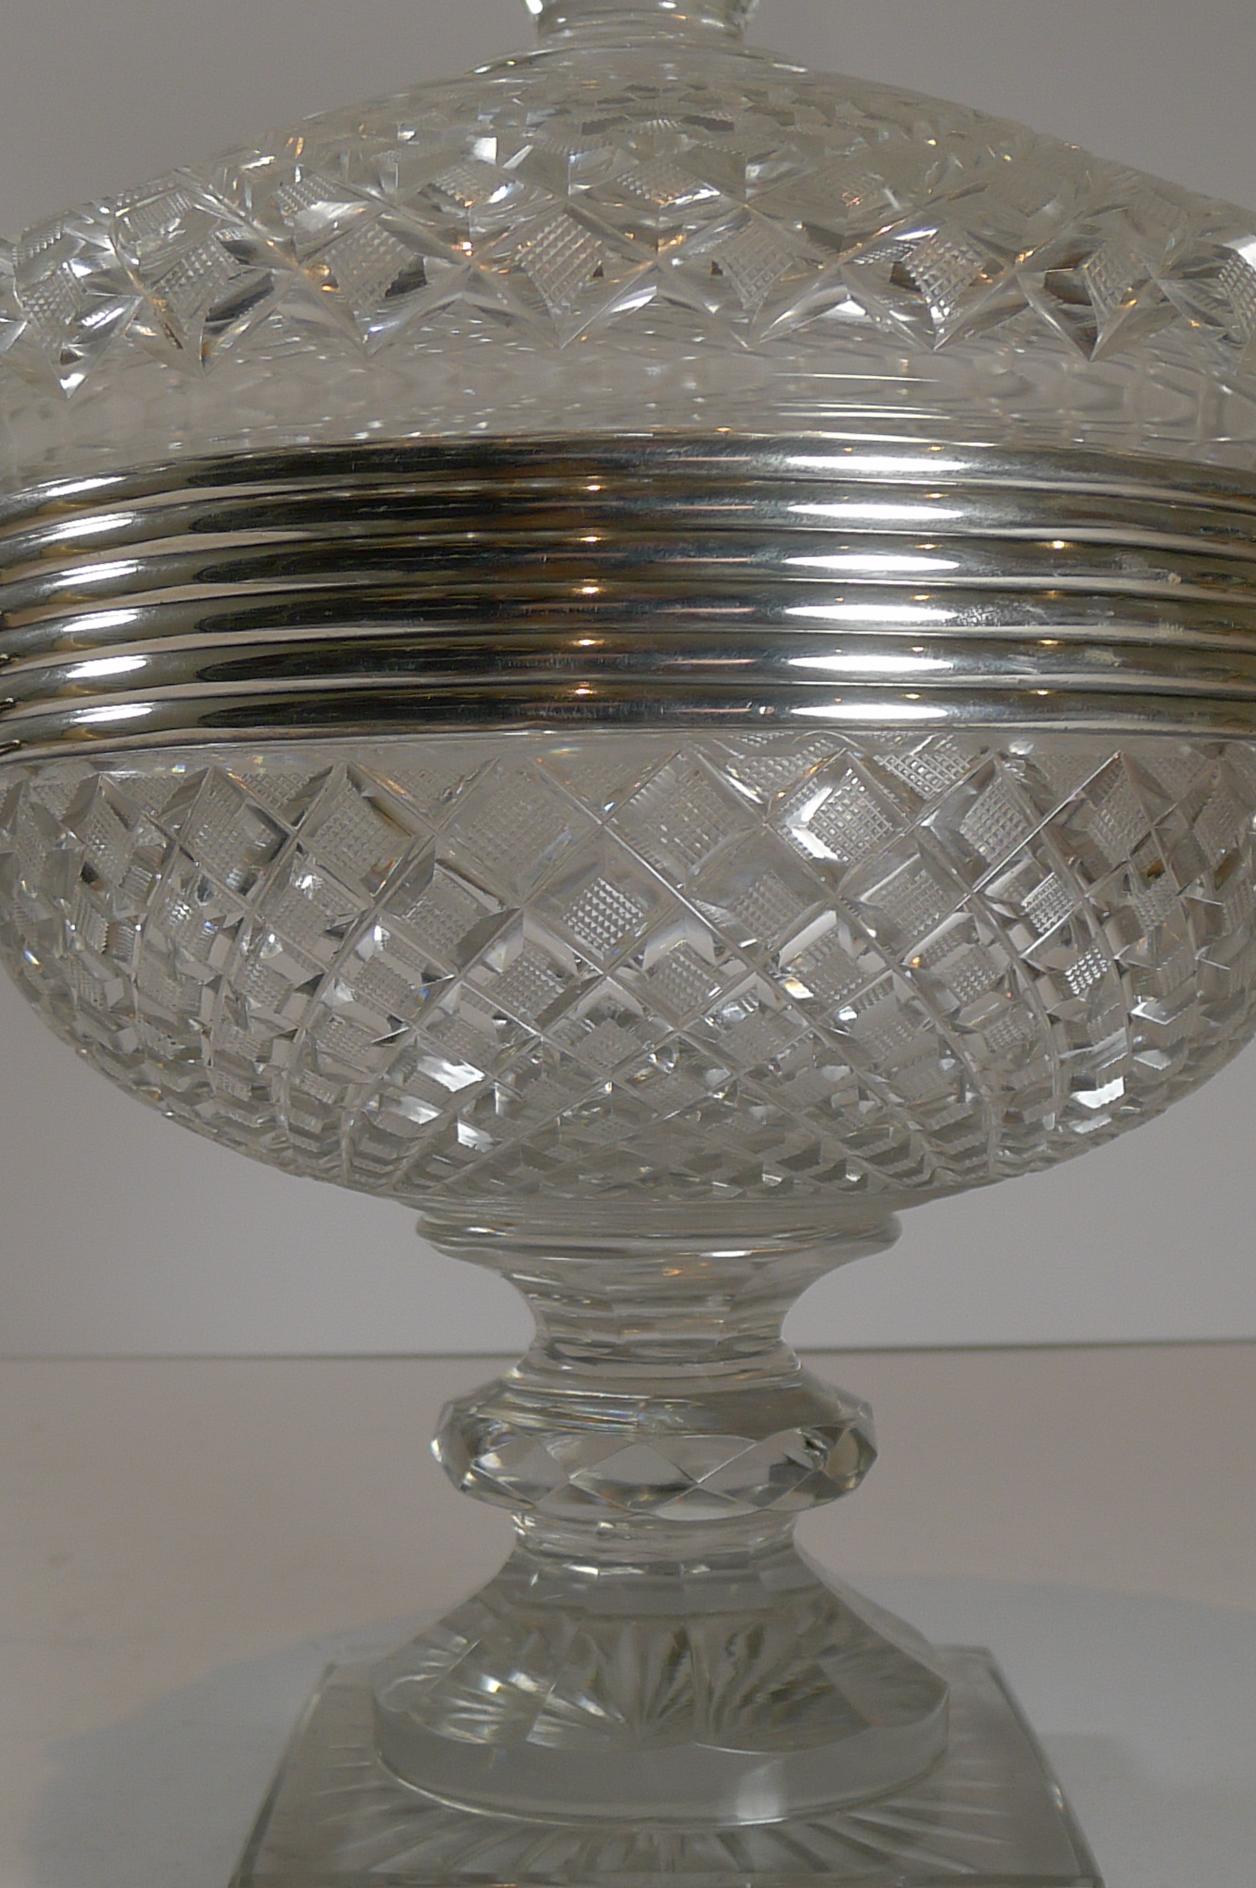 An outstanding large covered bowl or dish made from heavy hand-cut crystal, a true grand centrepiece.

The Dutch silver mount is marked with the single sword mark used between 1814 to 1905; this piece dating to c.1880. The fabulous cast silver